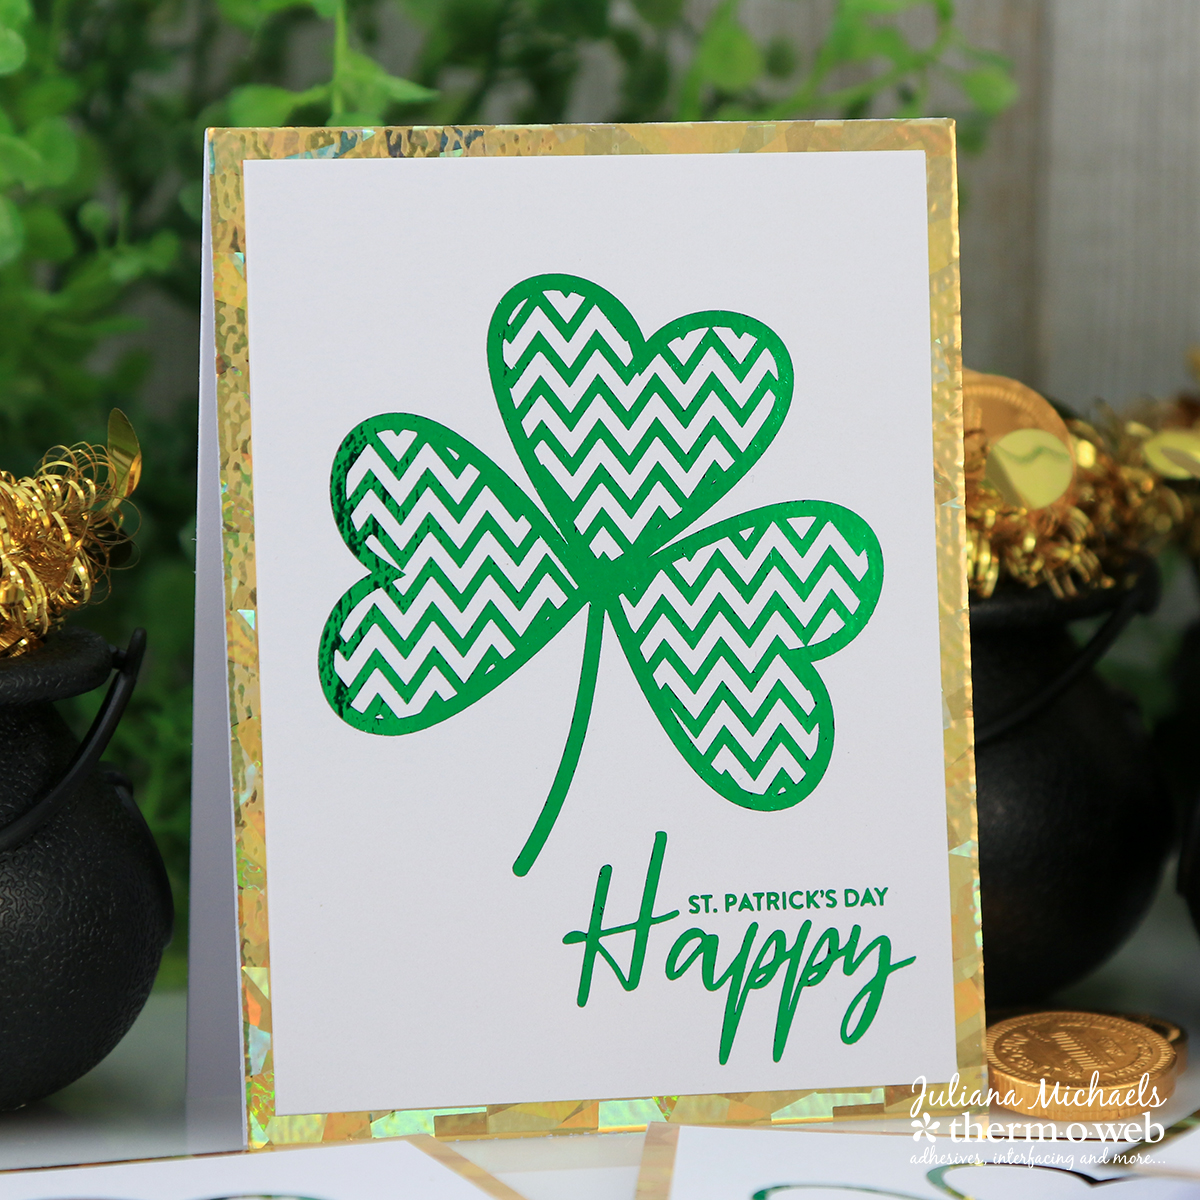 St. Patrick's Day Happy Card and Gift Set by Juliana Michaels featuring Therm O Web Deco Foil and Adhesives